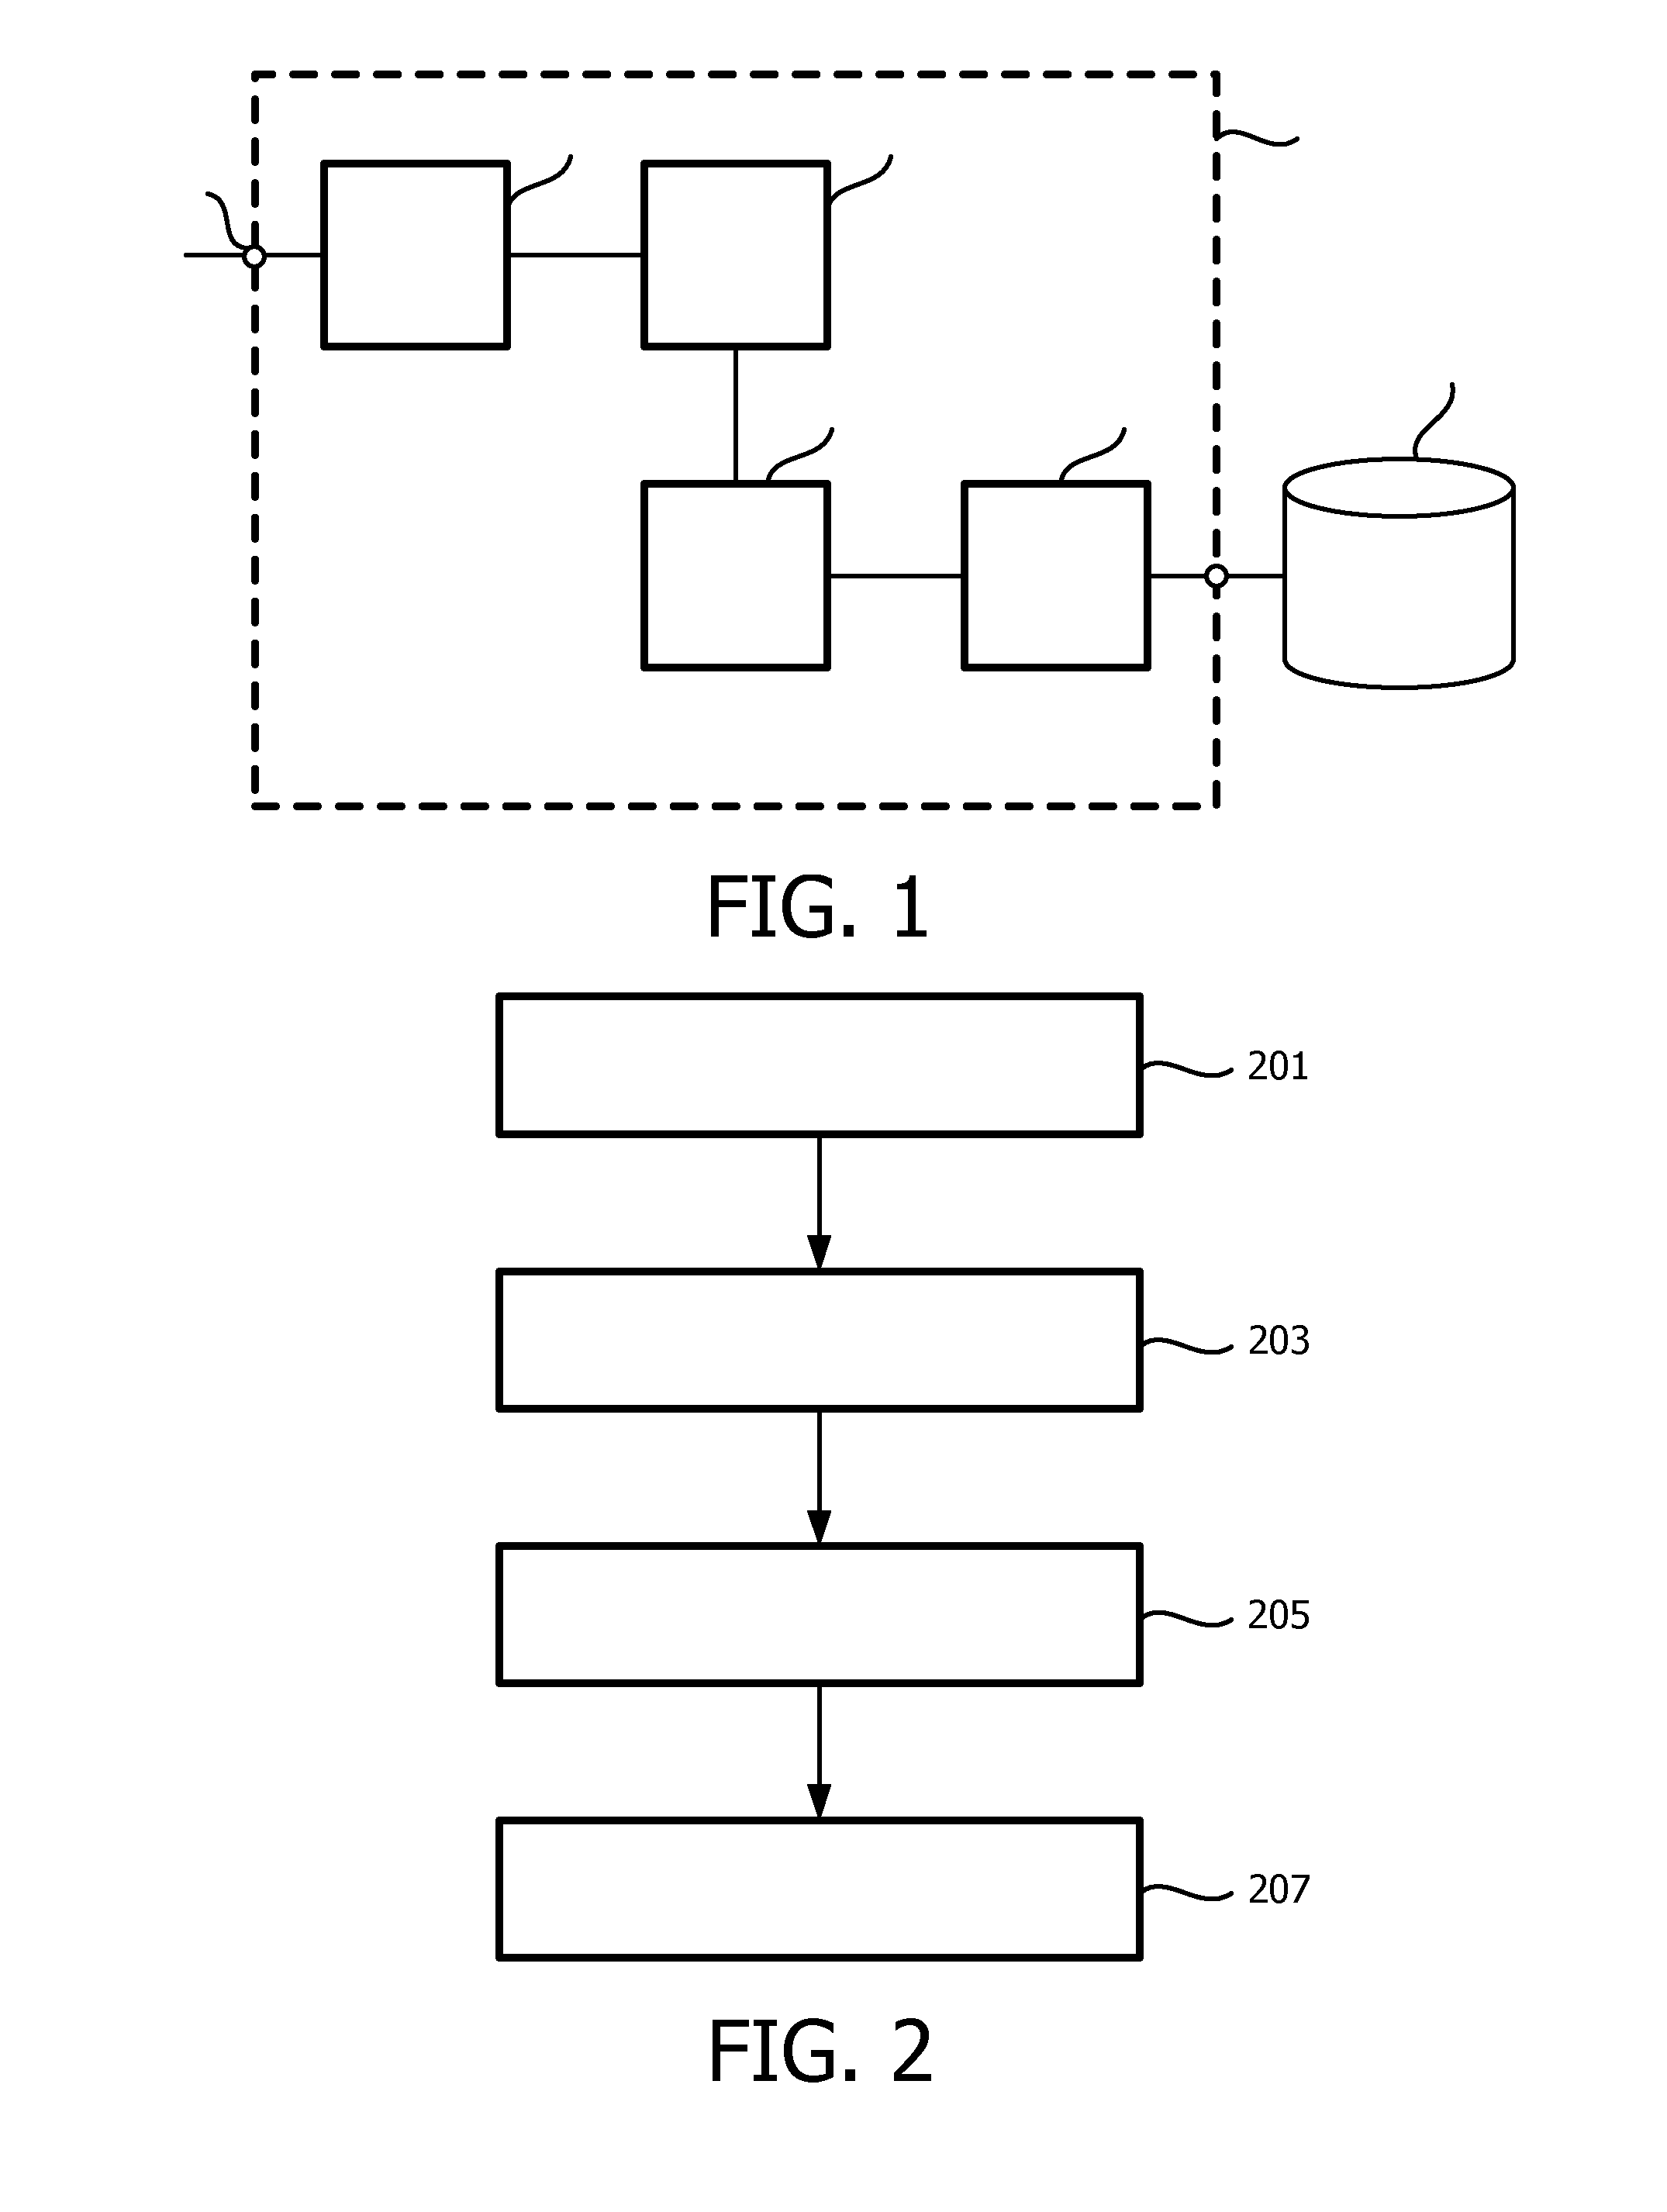 Method and apparatus for determining a value of an attribute to be associated with an image